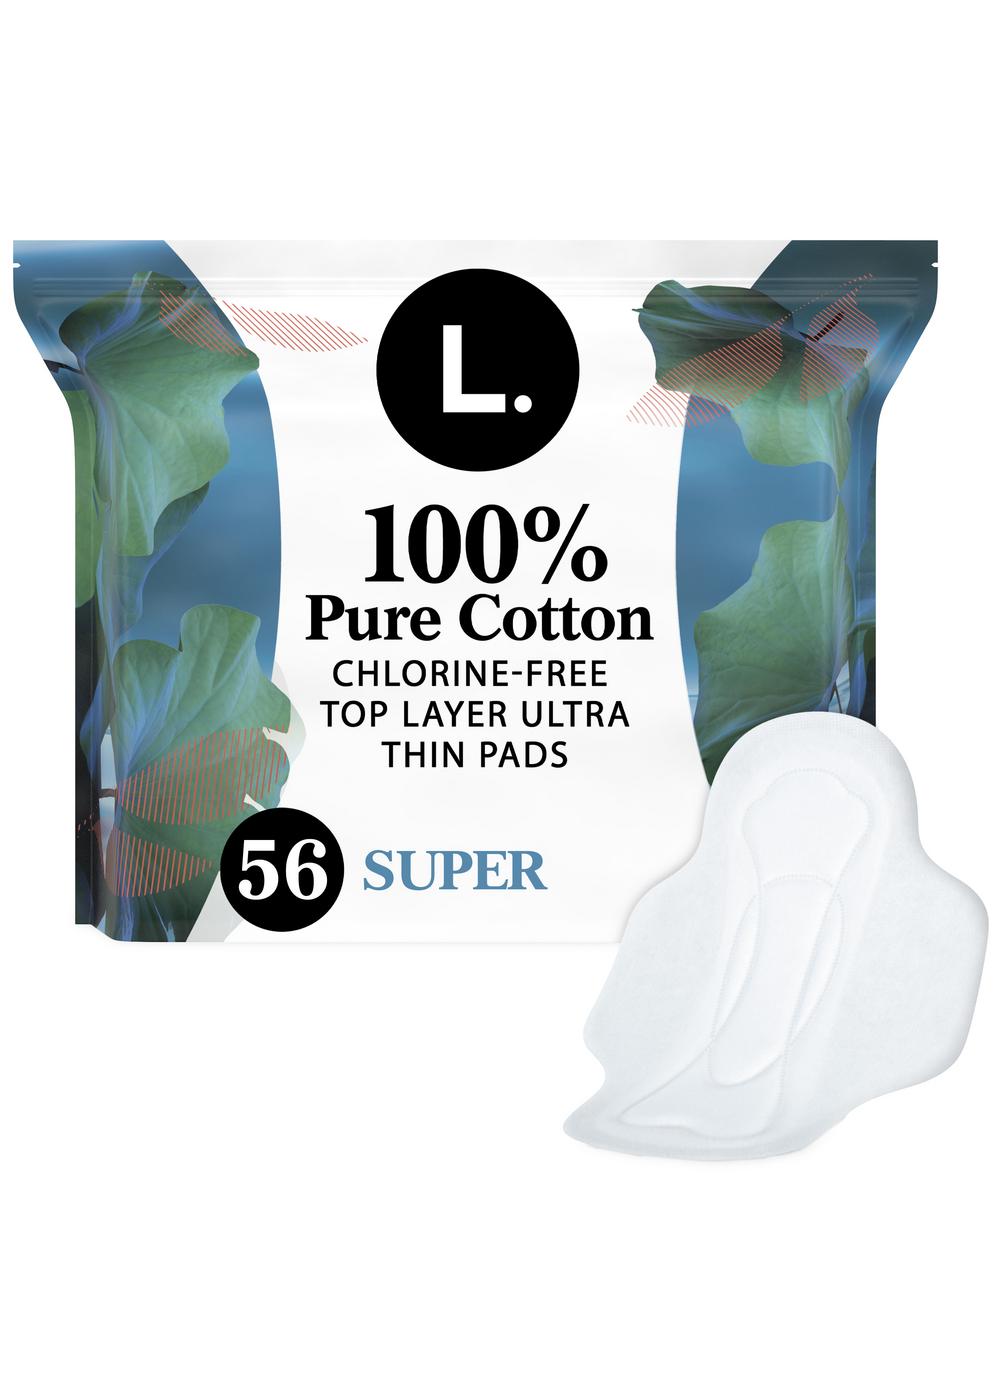 Ultra Thin Pads, Super Absorbency, 56 Ct, 100% Pure Cotton, 53% OFF